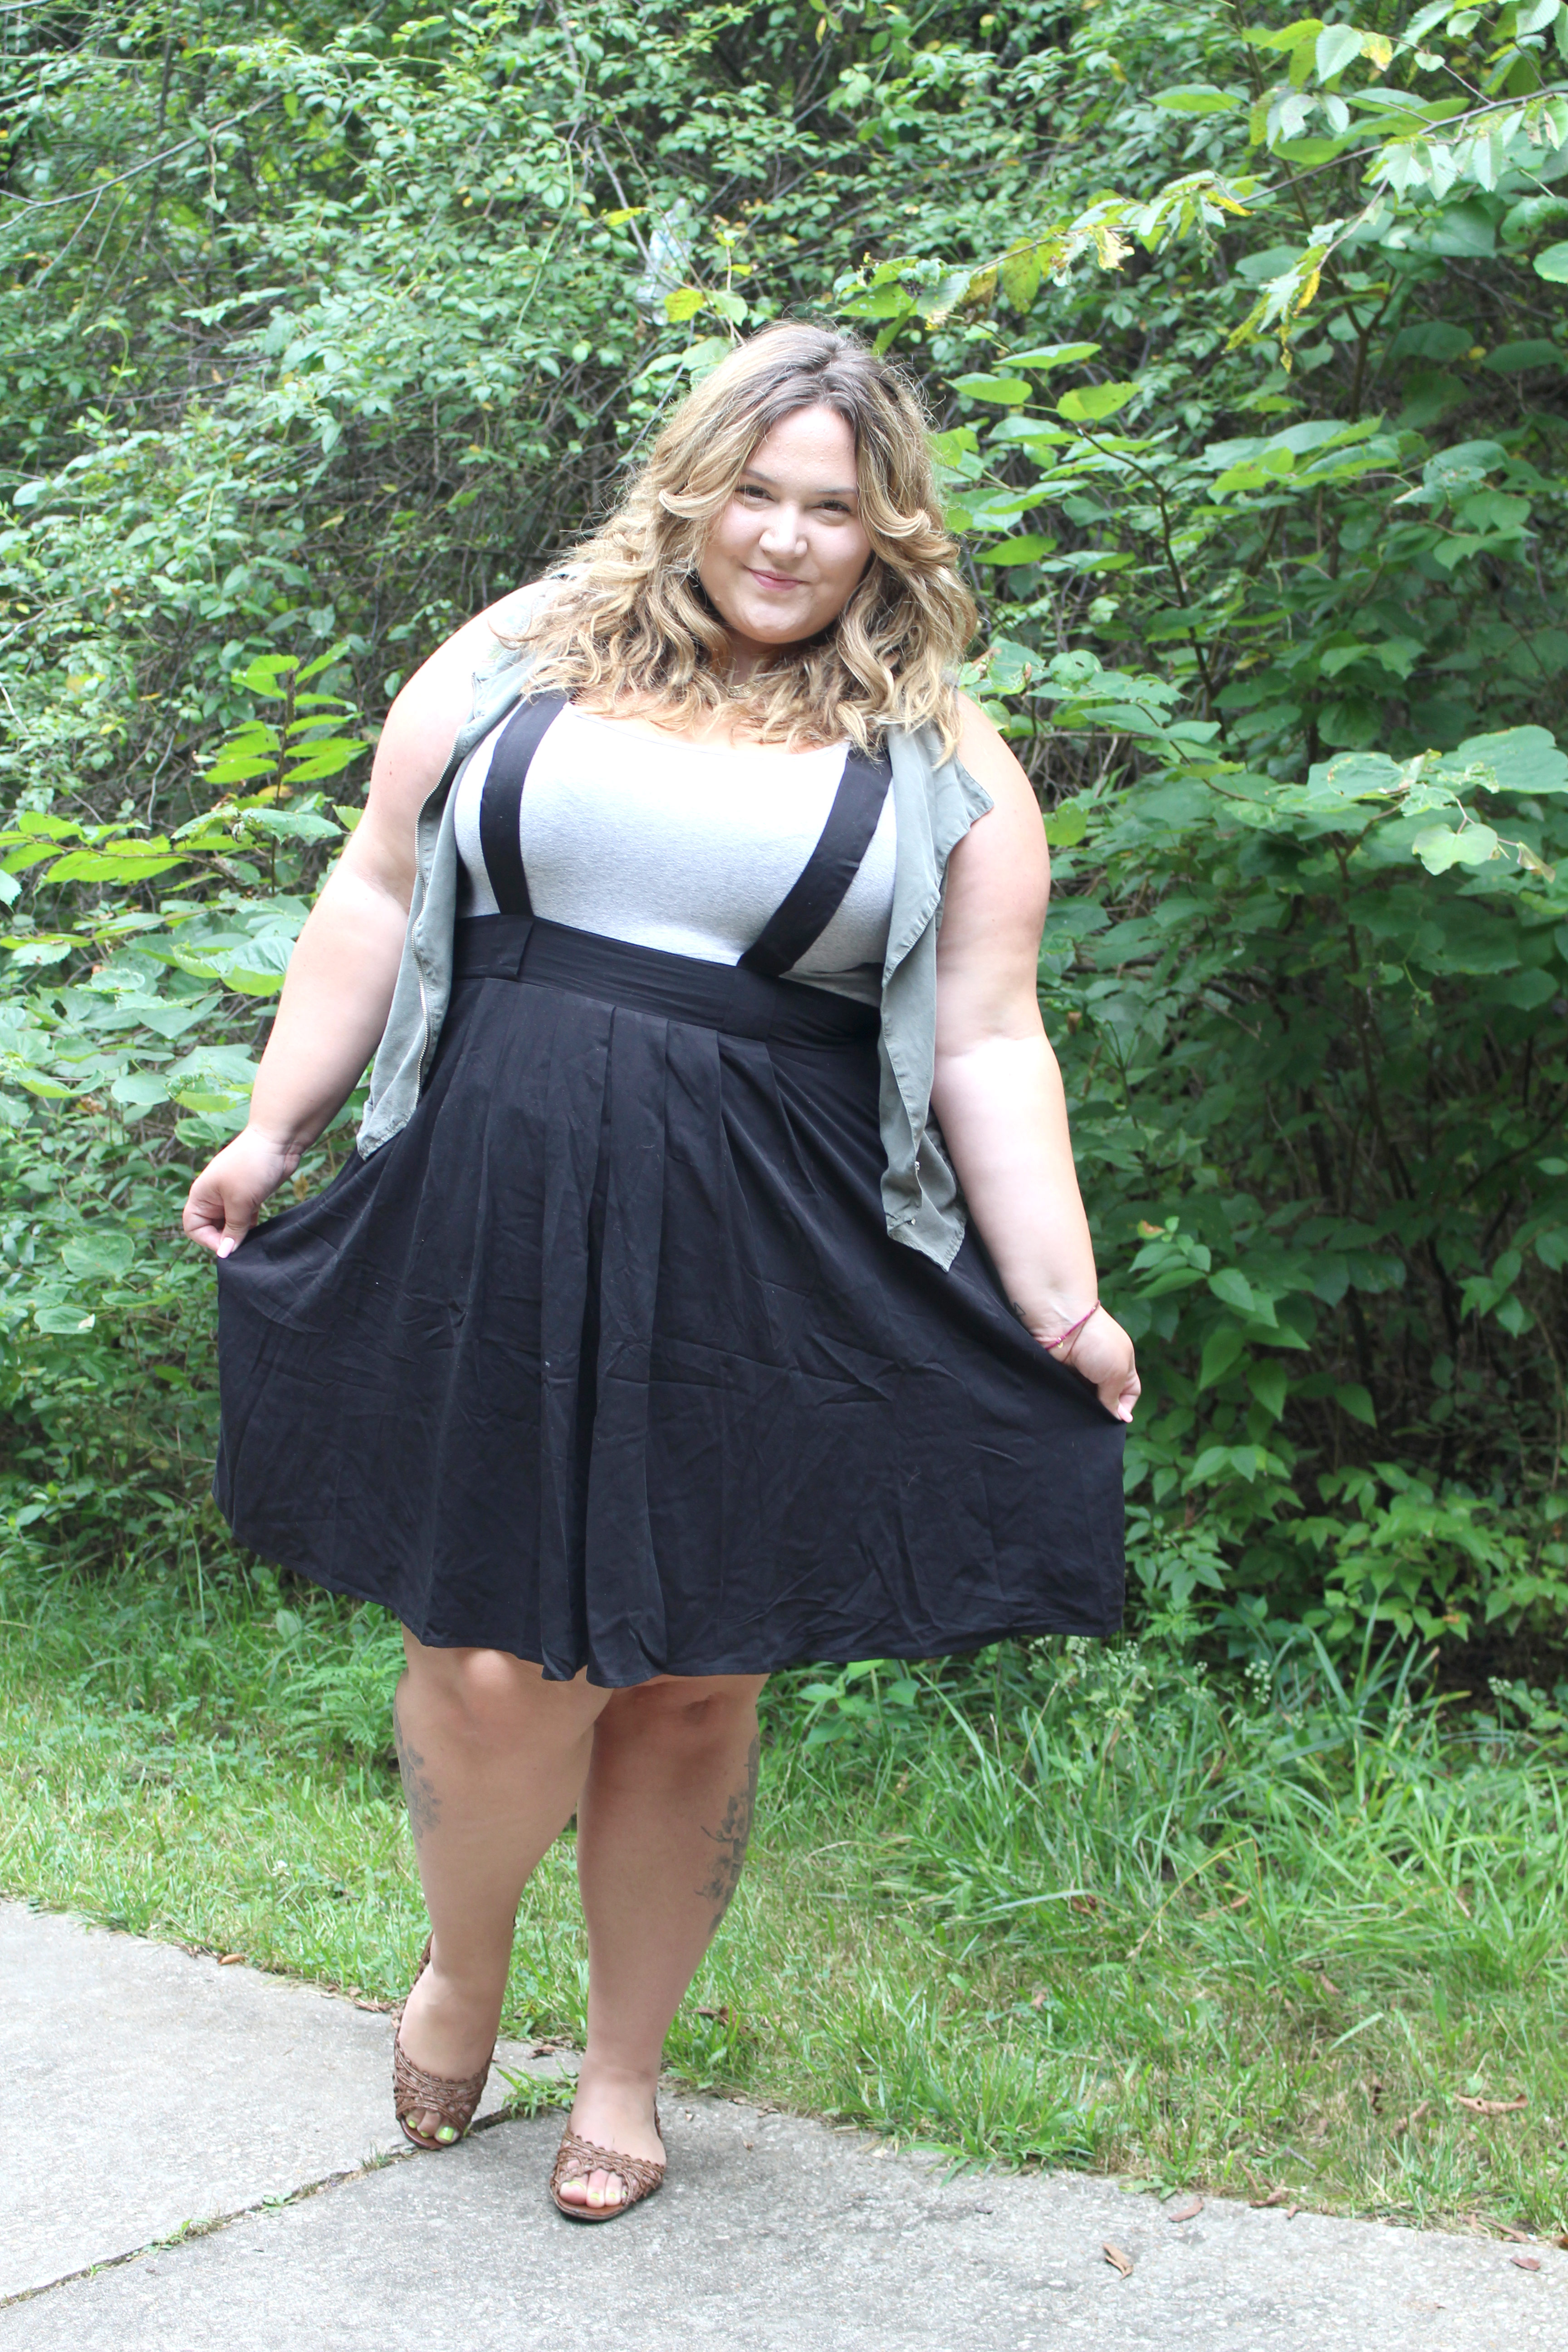 Mathilde Broberg: Obese woman now a model thanks to 